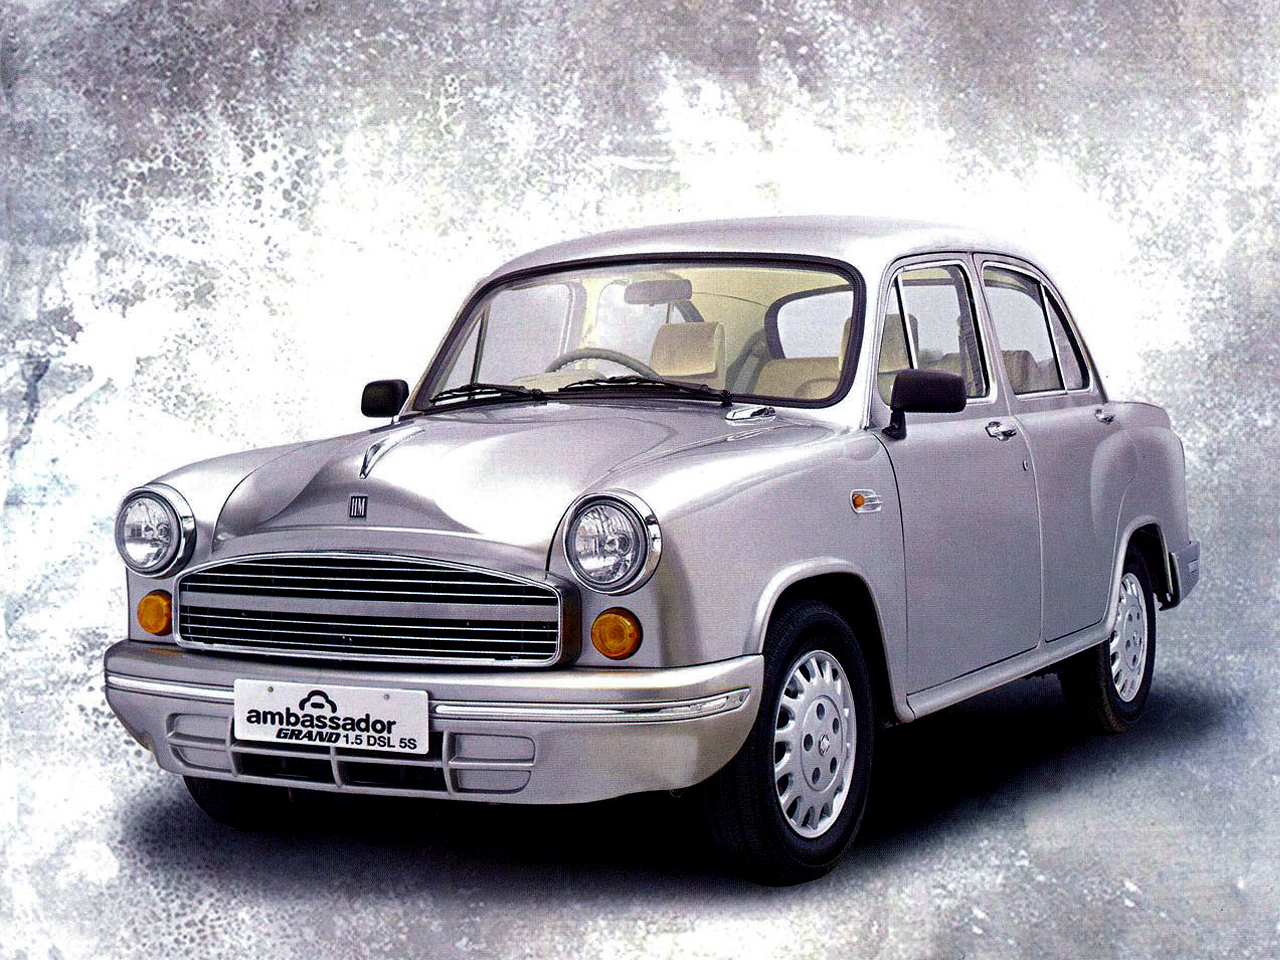 Hindustan Ambassador, First Car Made in India, Goes Out of Production